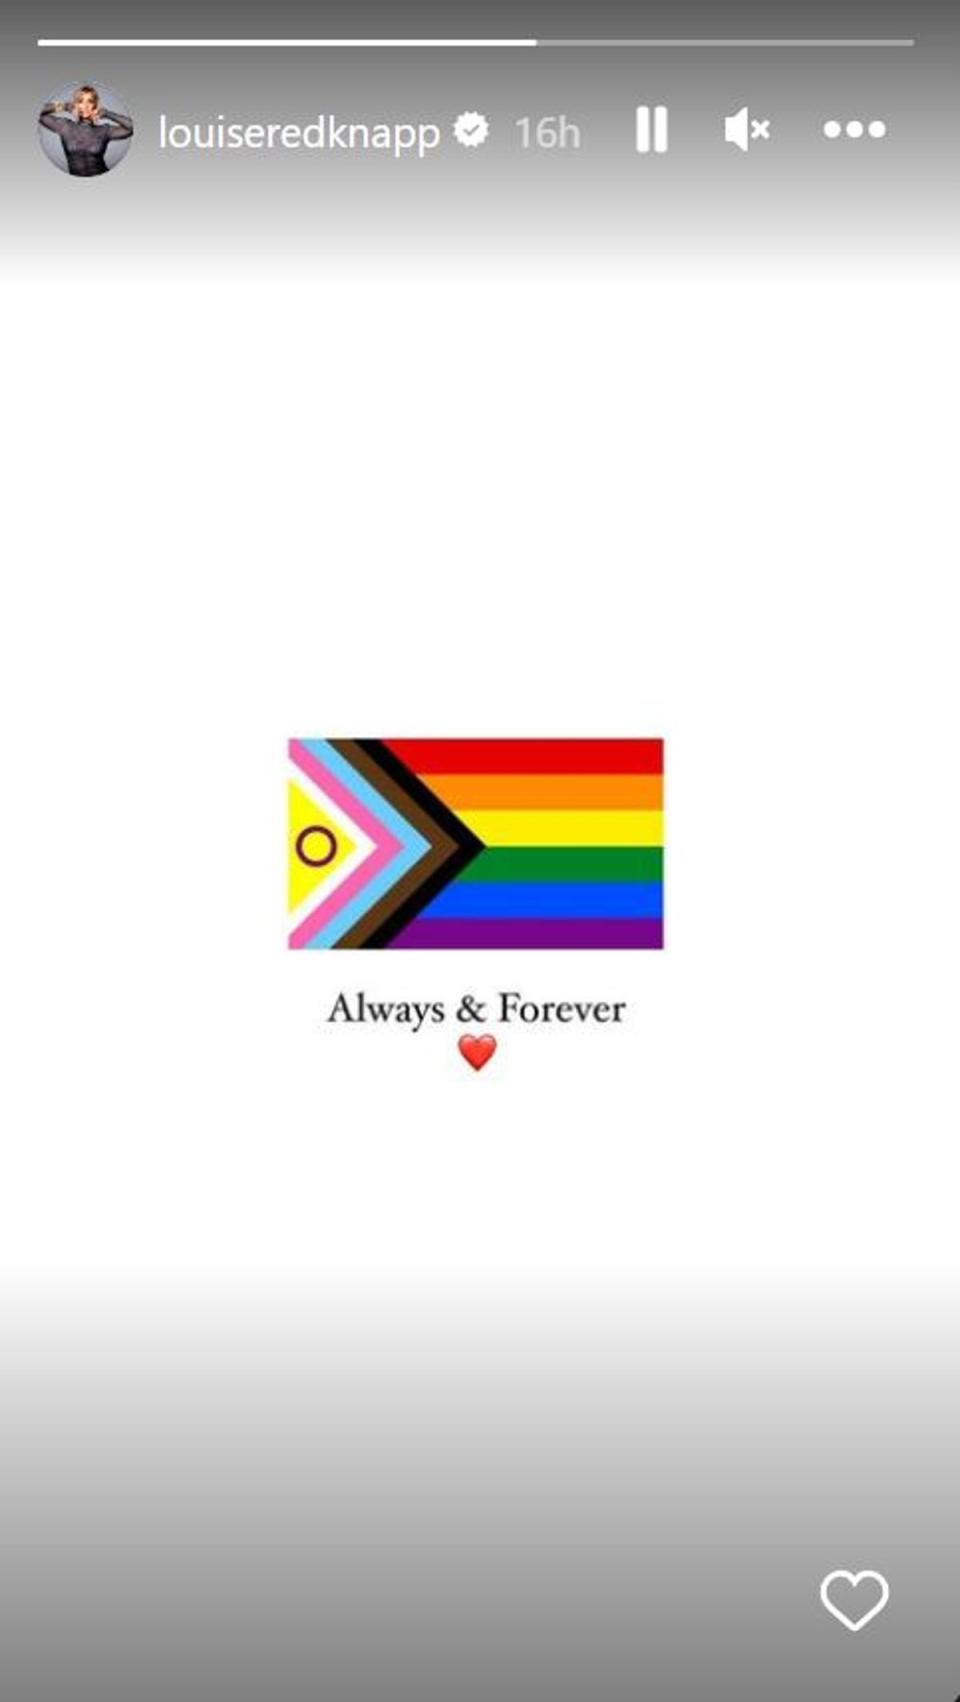 Louise Redknapp shared an image of the LGBTQ+ flag online in a message of solidarity (Instagram @louiseredknapp)